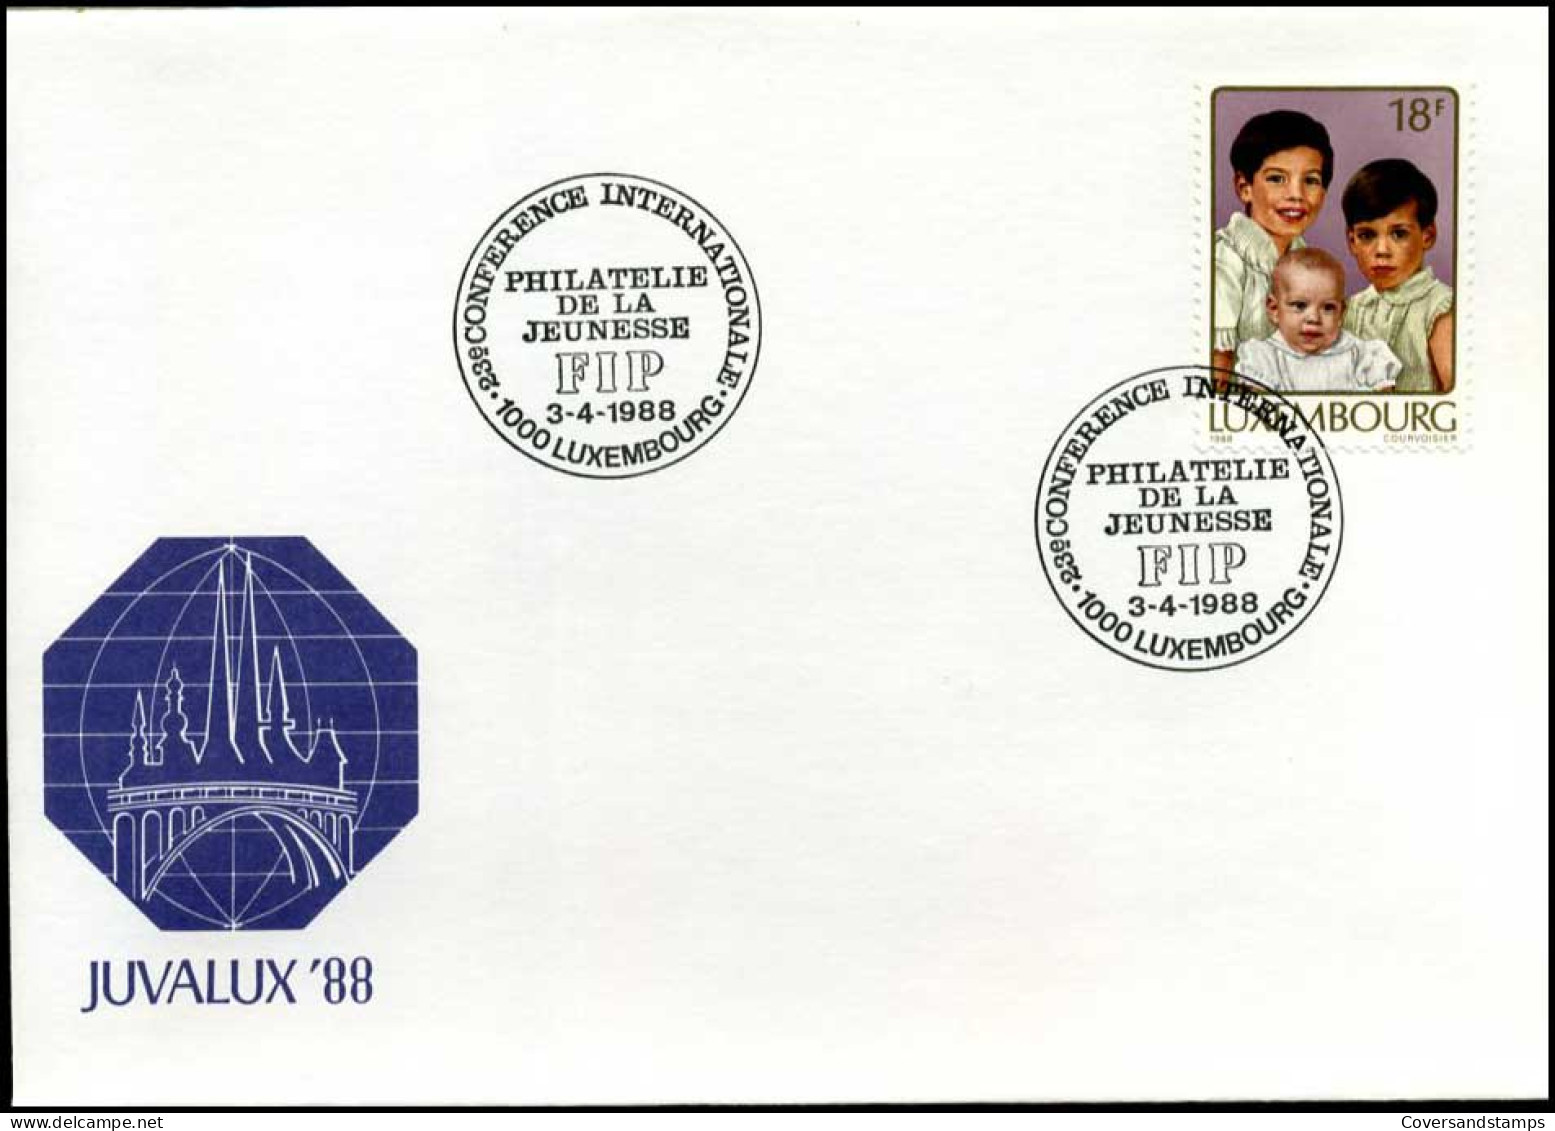 Luxembourg - FDC - Juvalux 88 - FDC